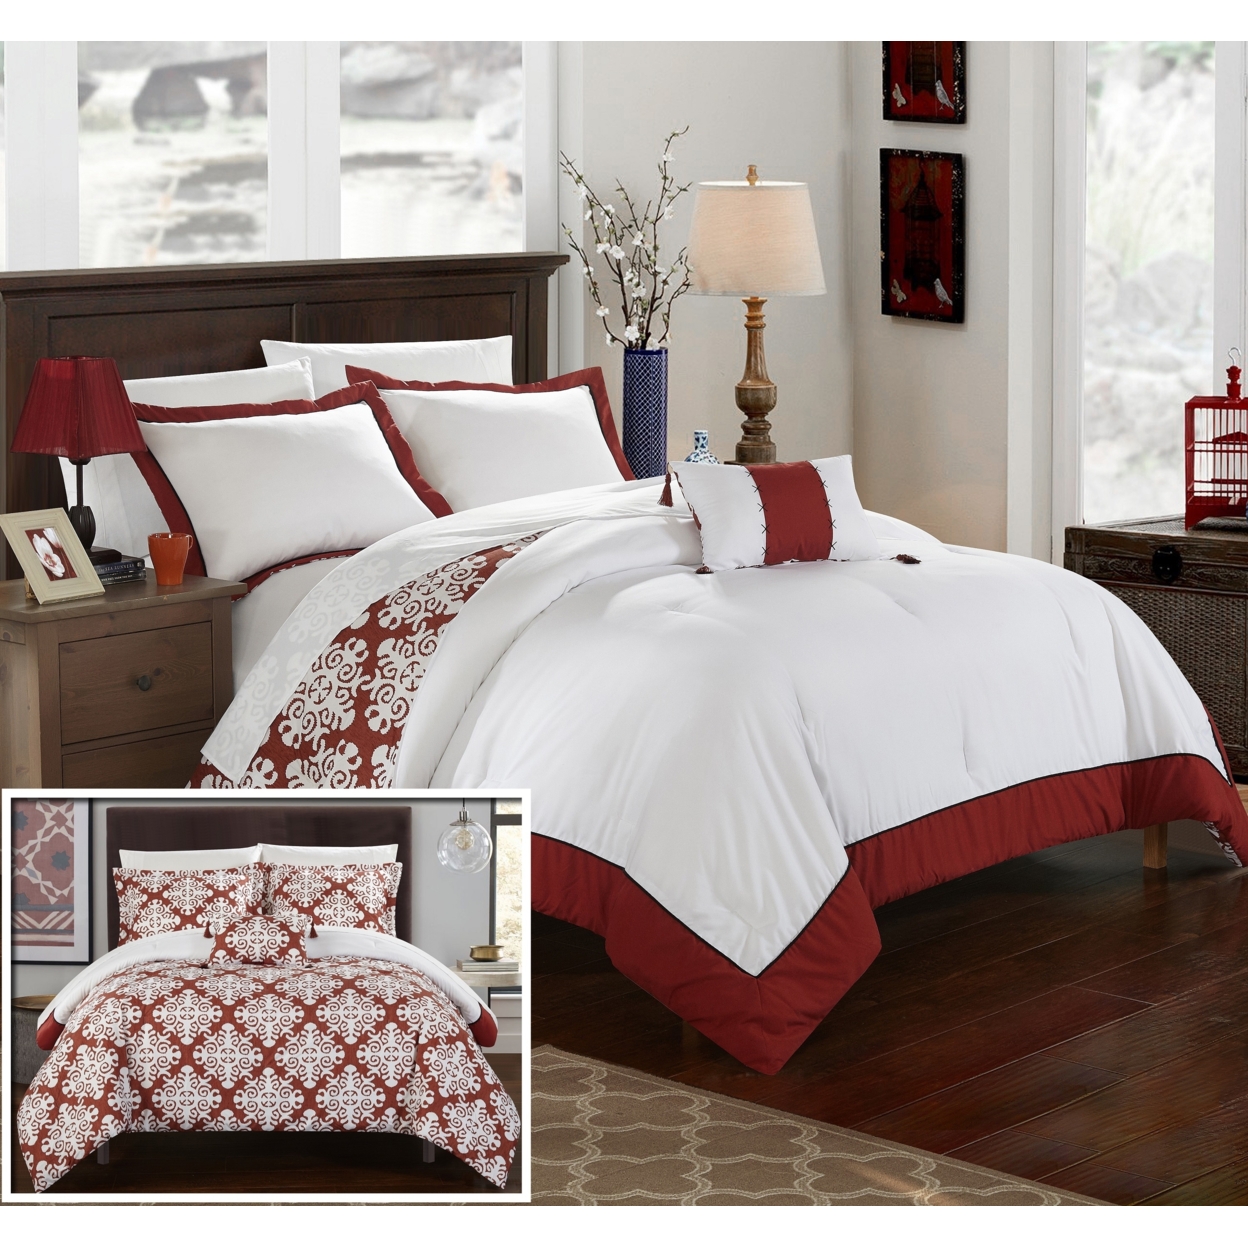 Chic Home 3/4 Piece Mallow Black And White REVERSIBLE Medallion Printed PLUSH Hotel Collection Duvet Cover Set - Marsala, King